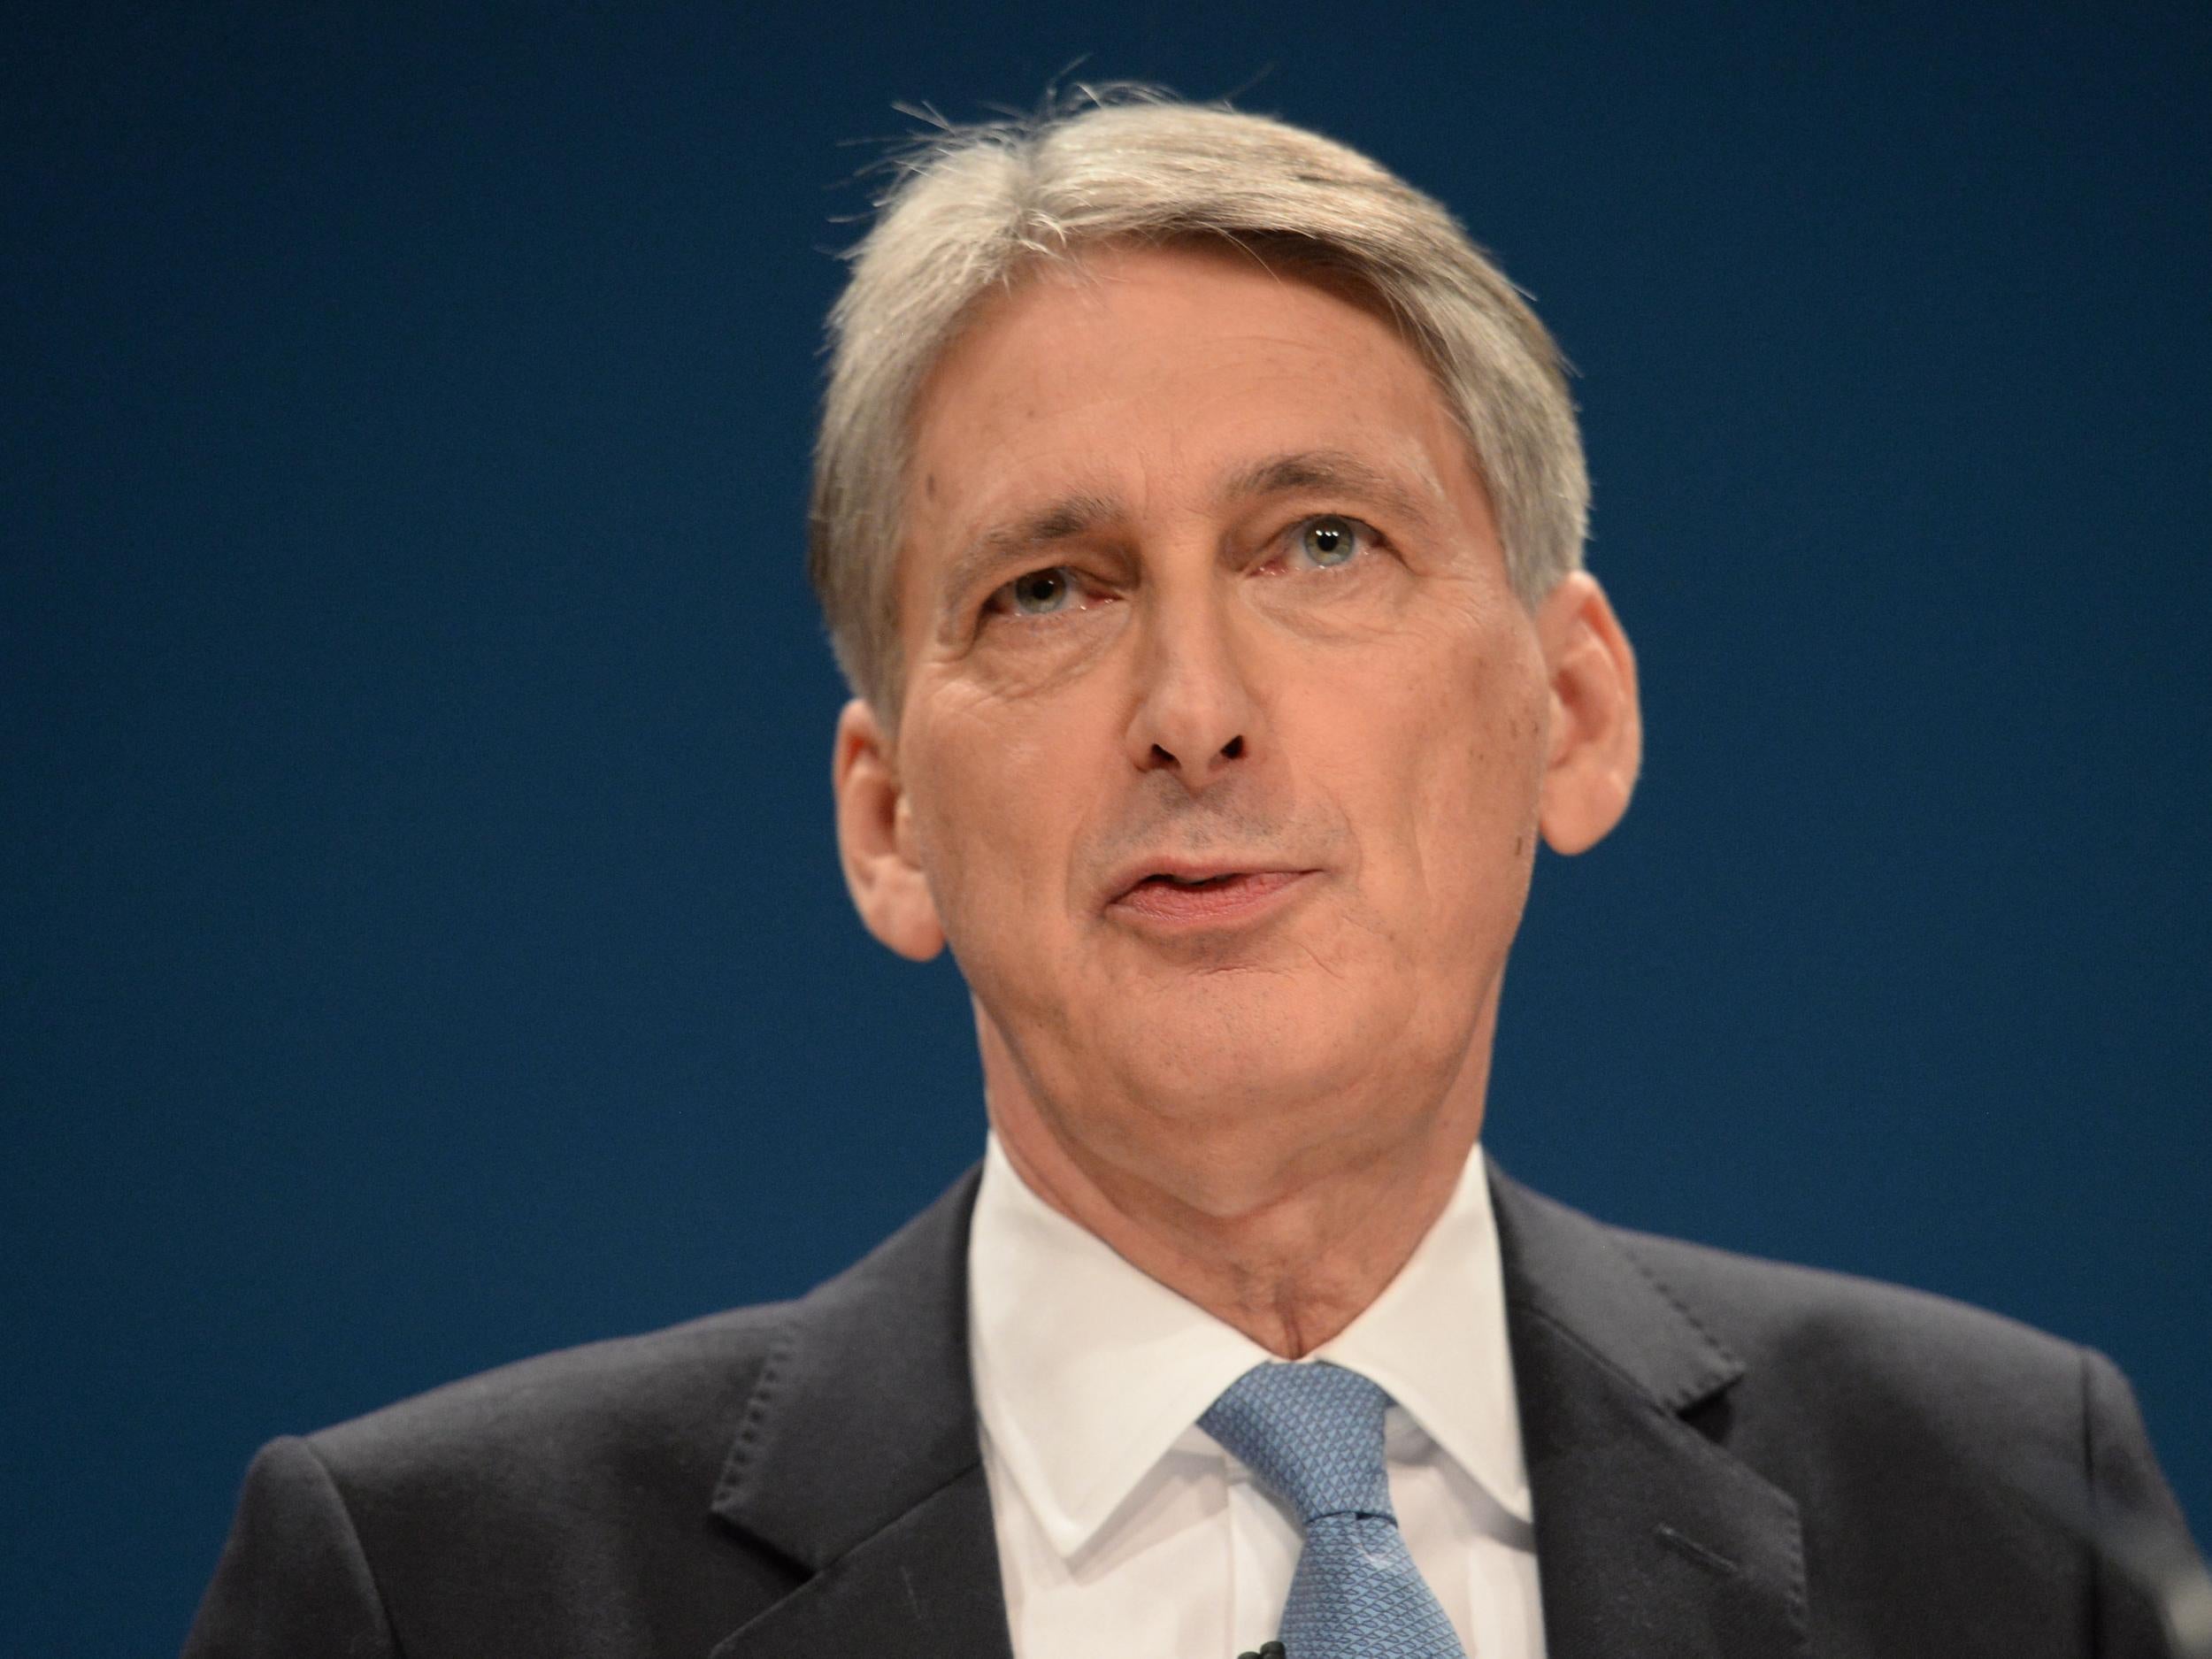 Philip Hammond is believed to be interested in proposals for infrastructure bonds